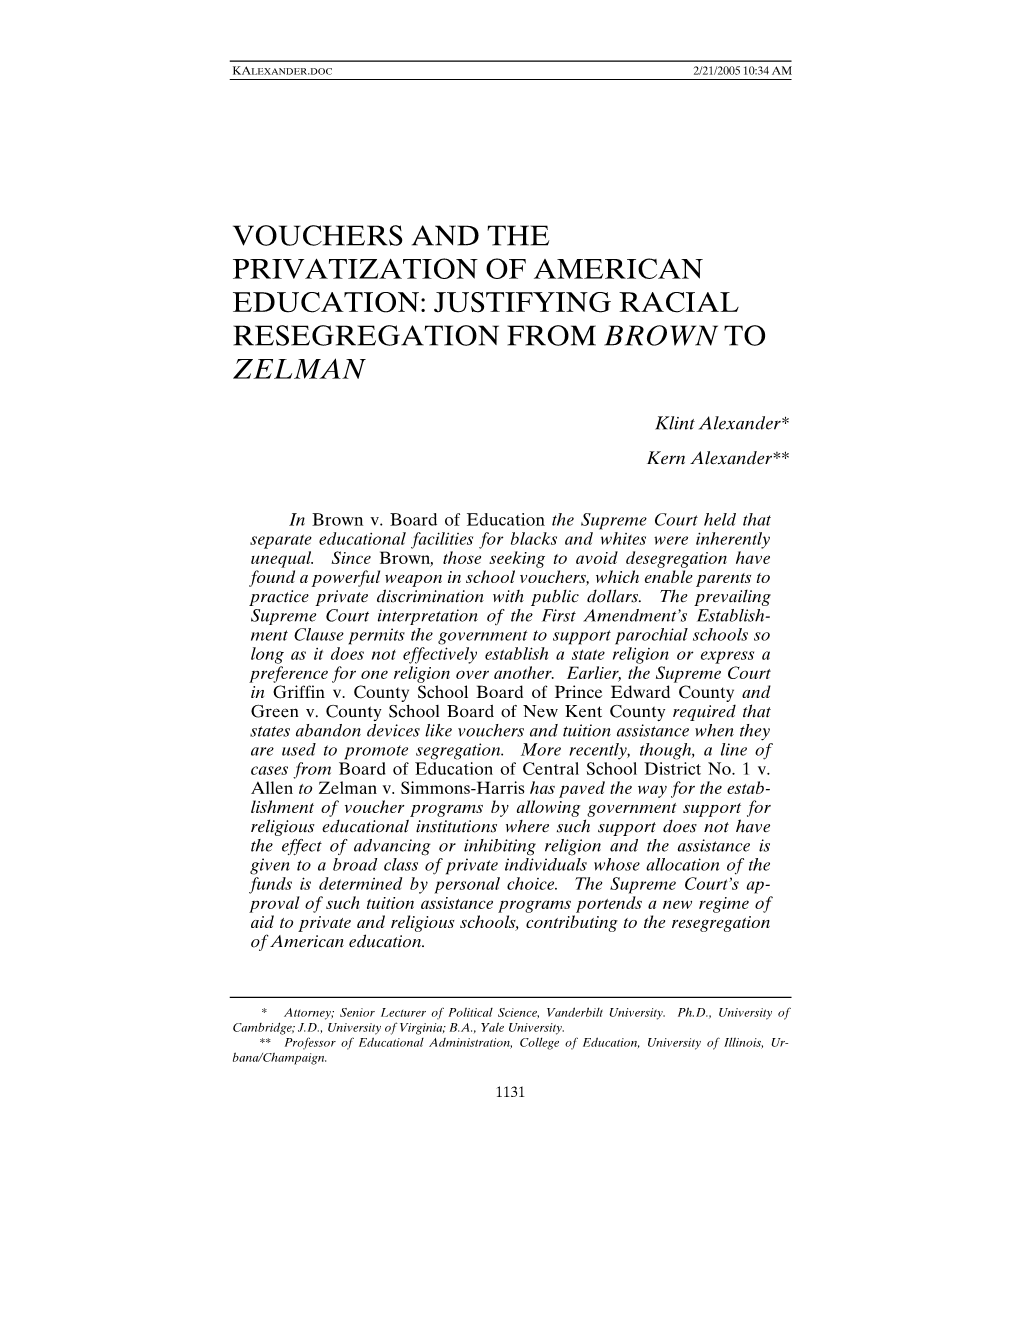 Vouchers and the Privatization of American Education: Justifying Racial Resegregation from Brown to Zelman